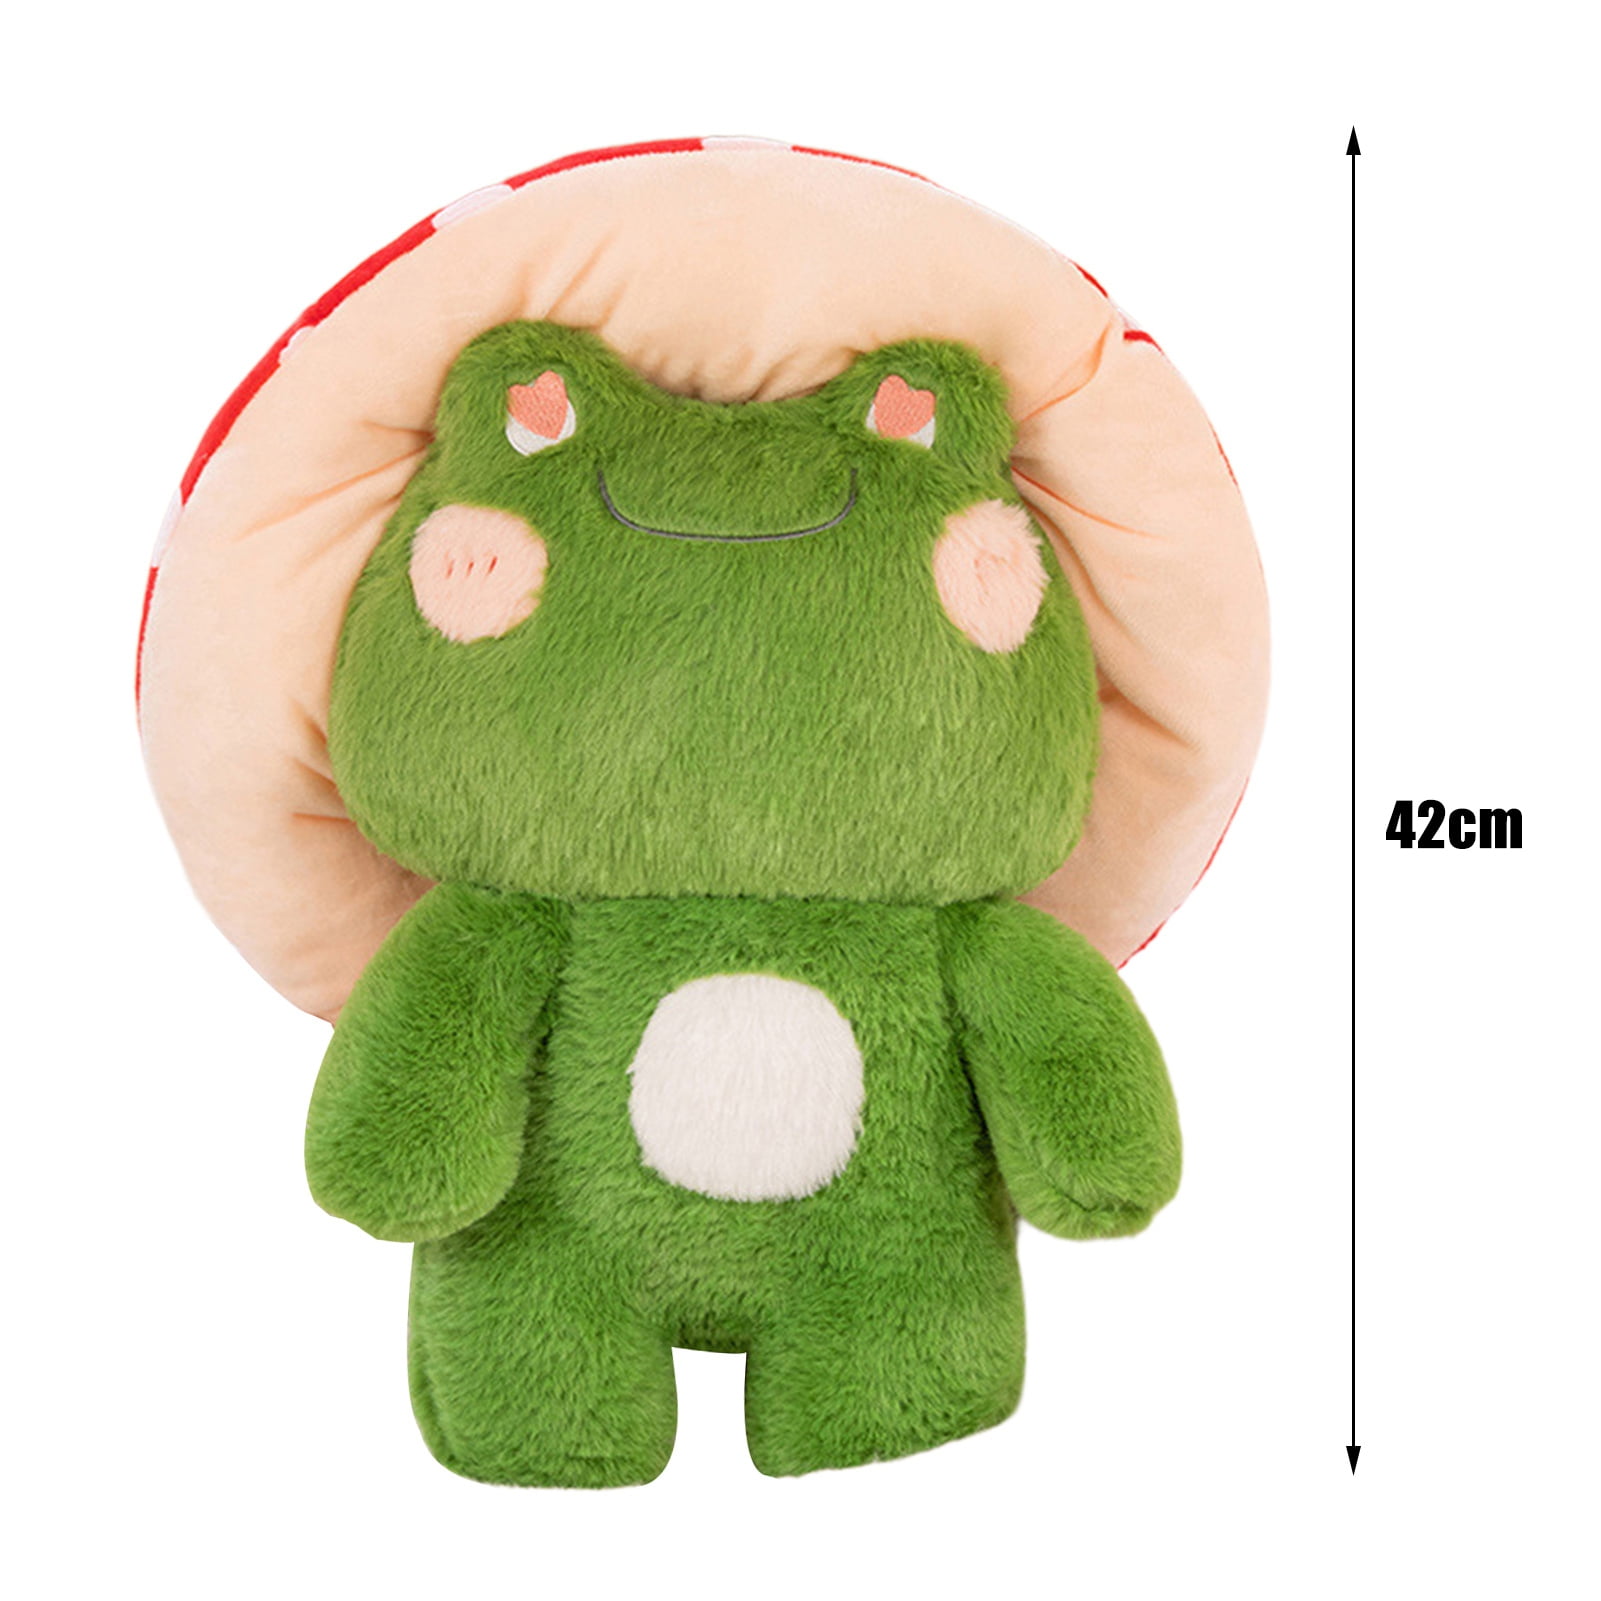  Frog Plush Toys, 17 Cute Frog with Red Mushroom Hat